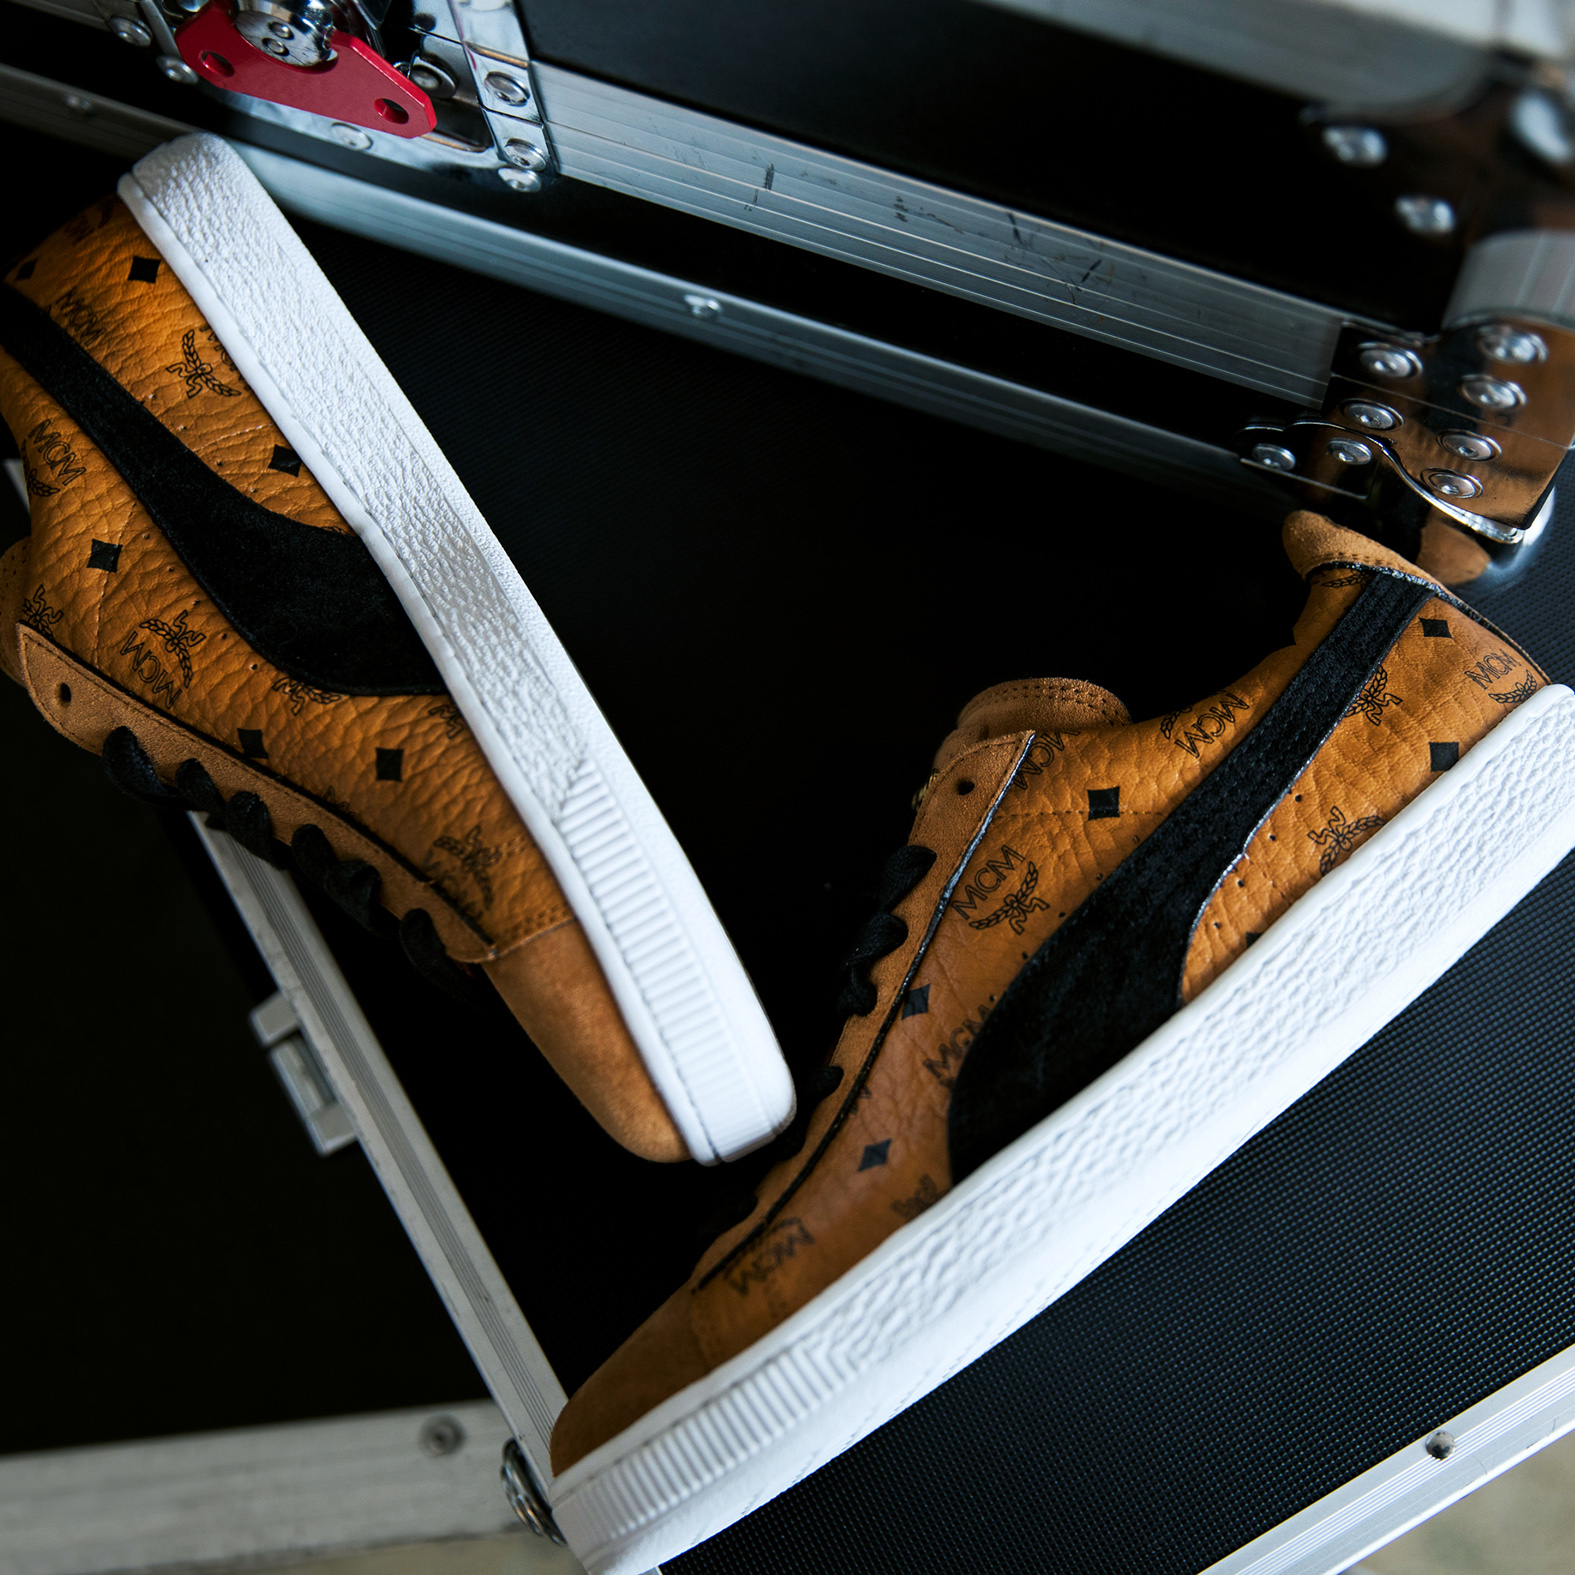 NEW PUMA X MCM COLLECTION IS HERE!